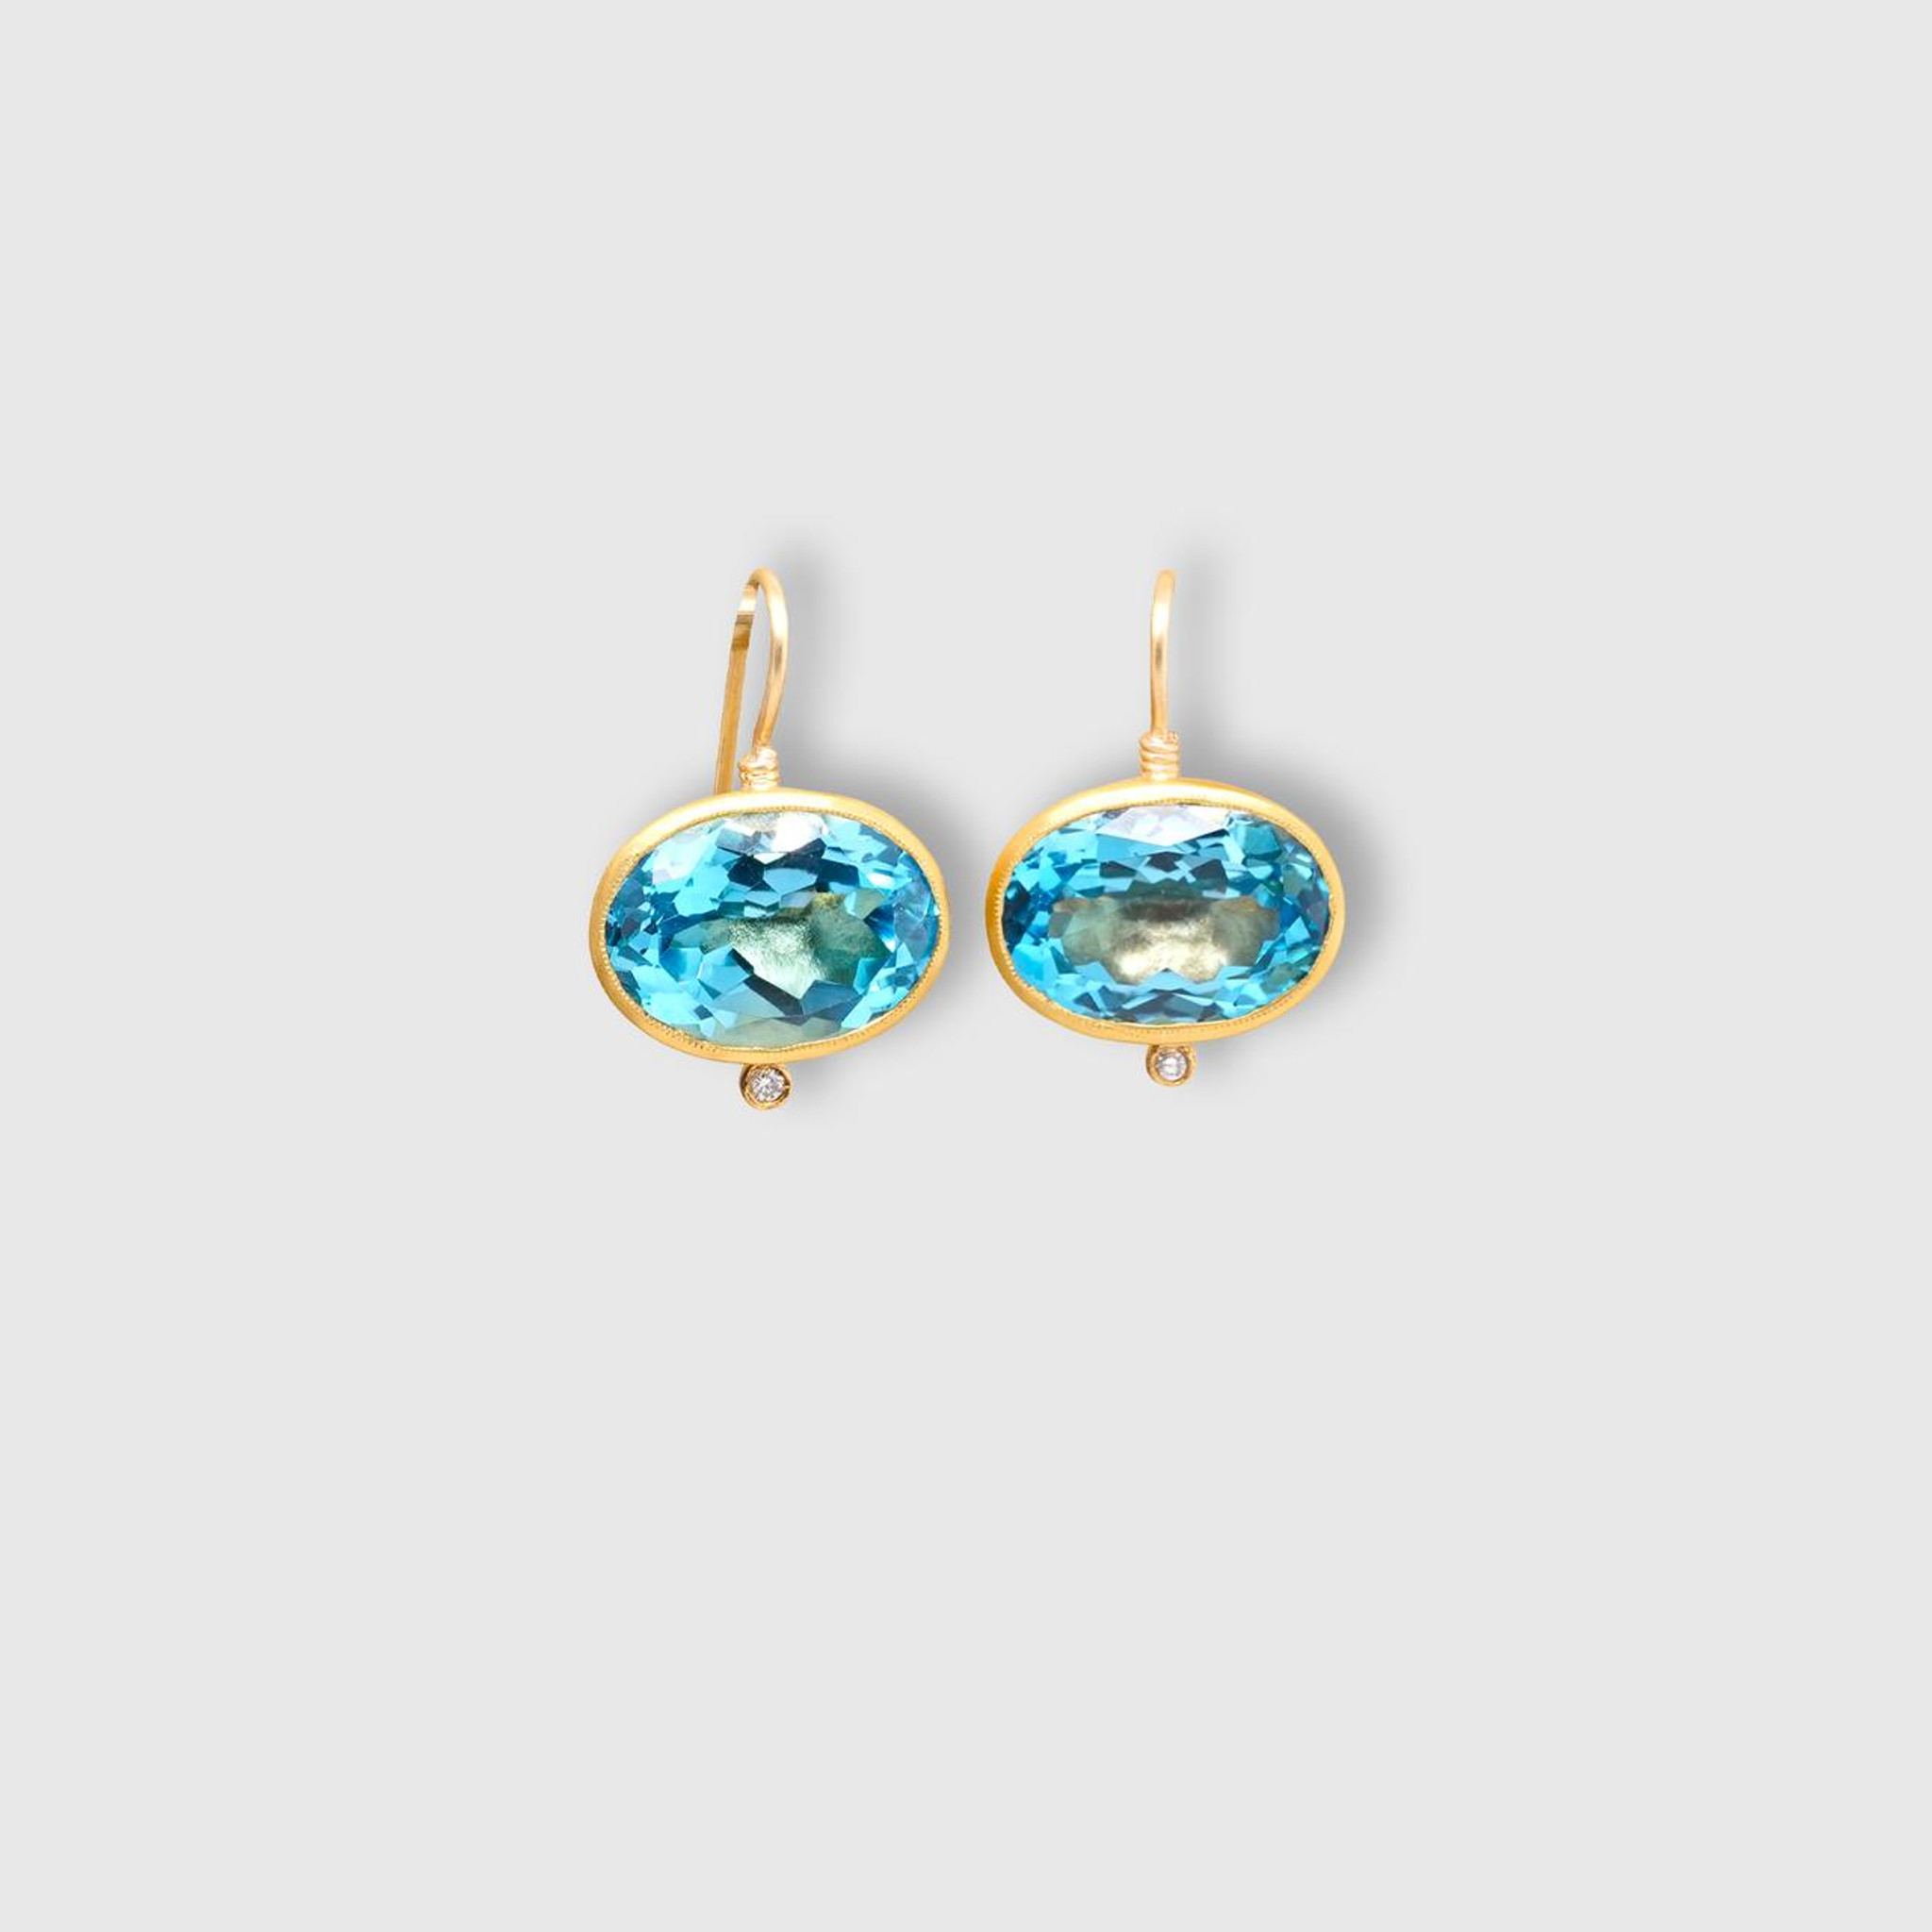 Prehistoric Works Large, 22.15 ct, Oval, Blue Topaz Earrings with Diamond Detail, in 24kt Solid Yellow Gold 